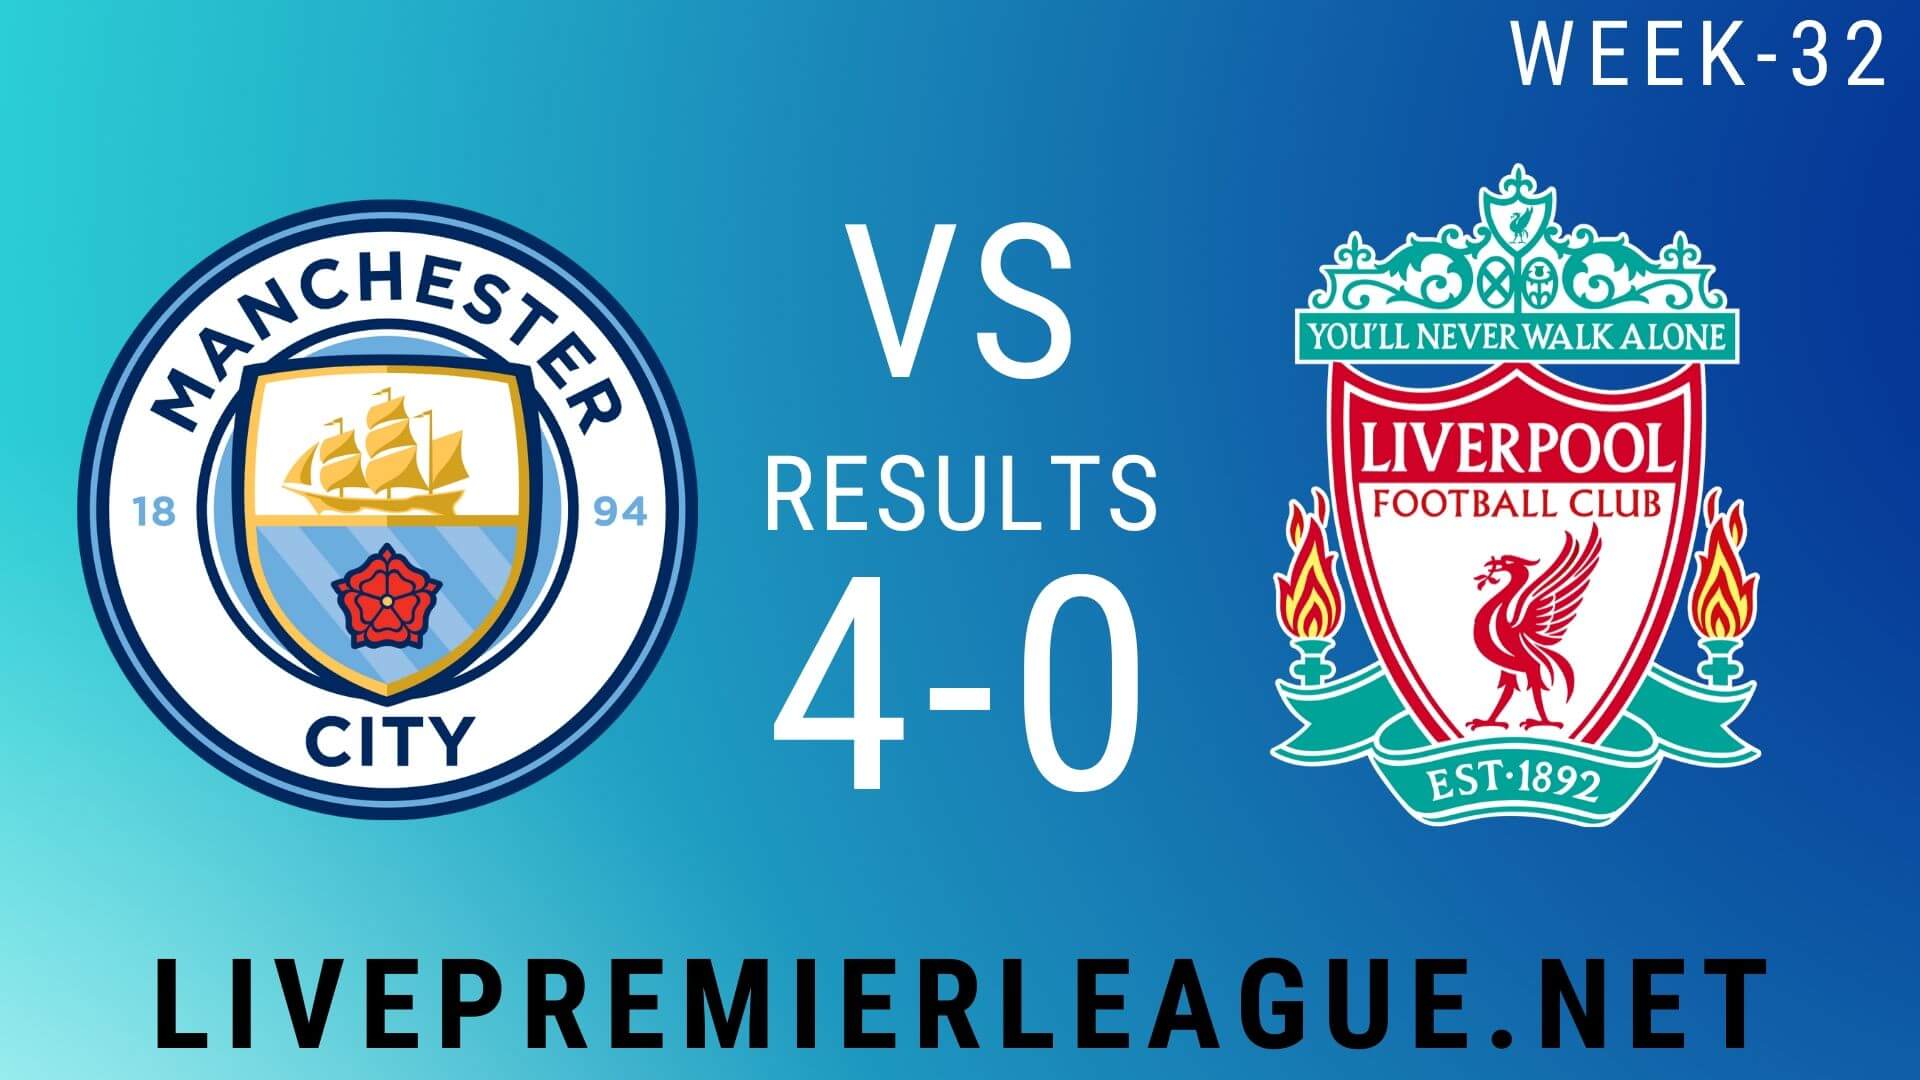 Manchester City Vs Liverpool | Week 32 Result 2020